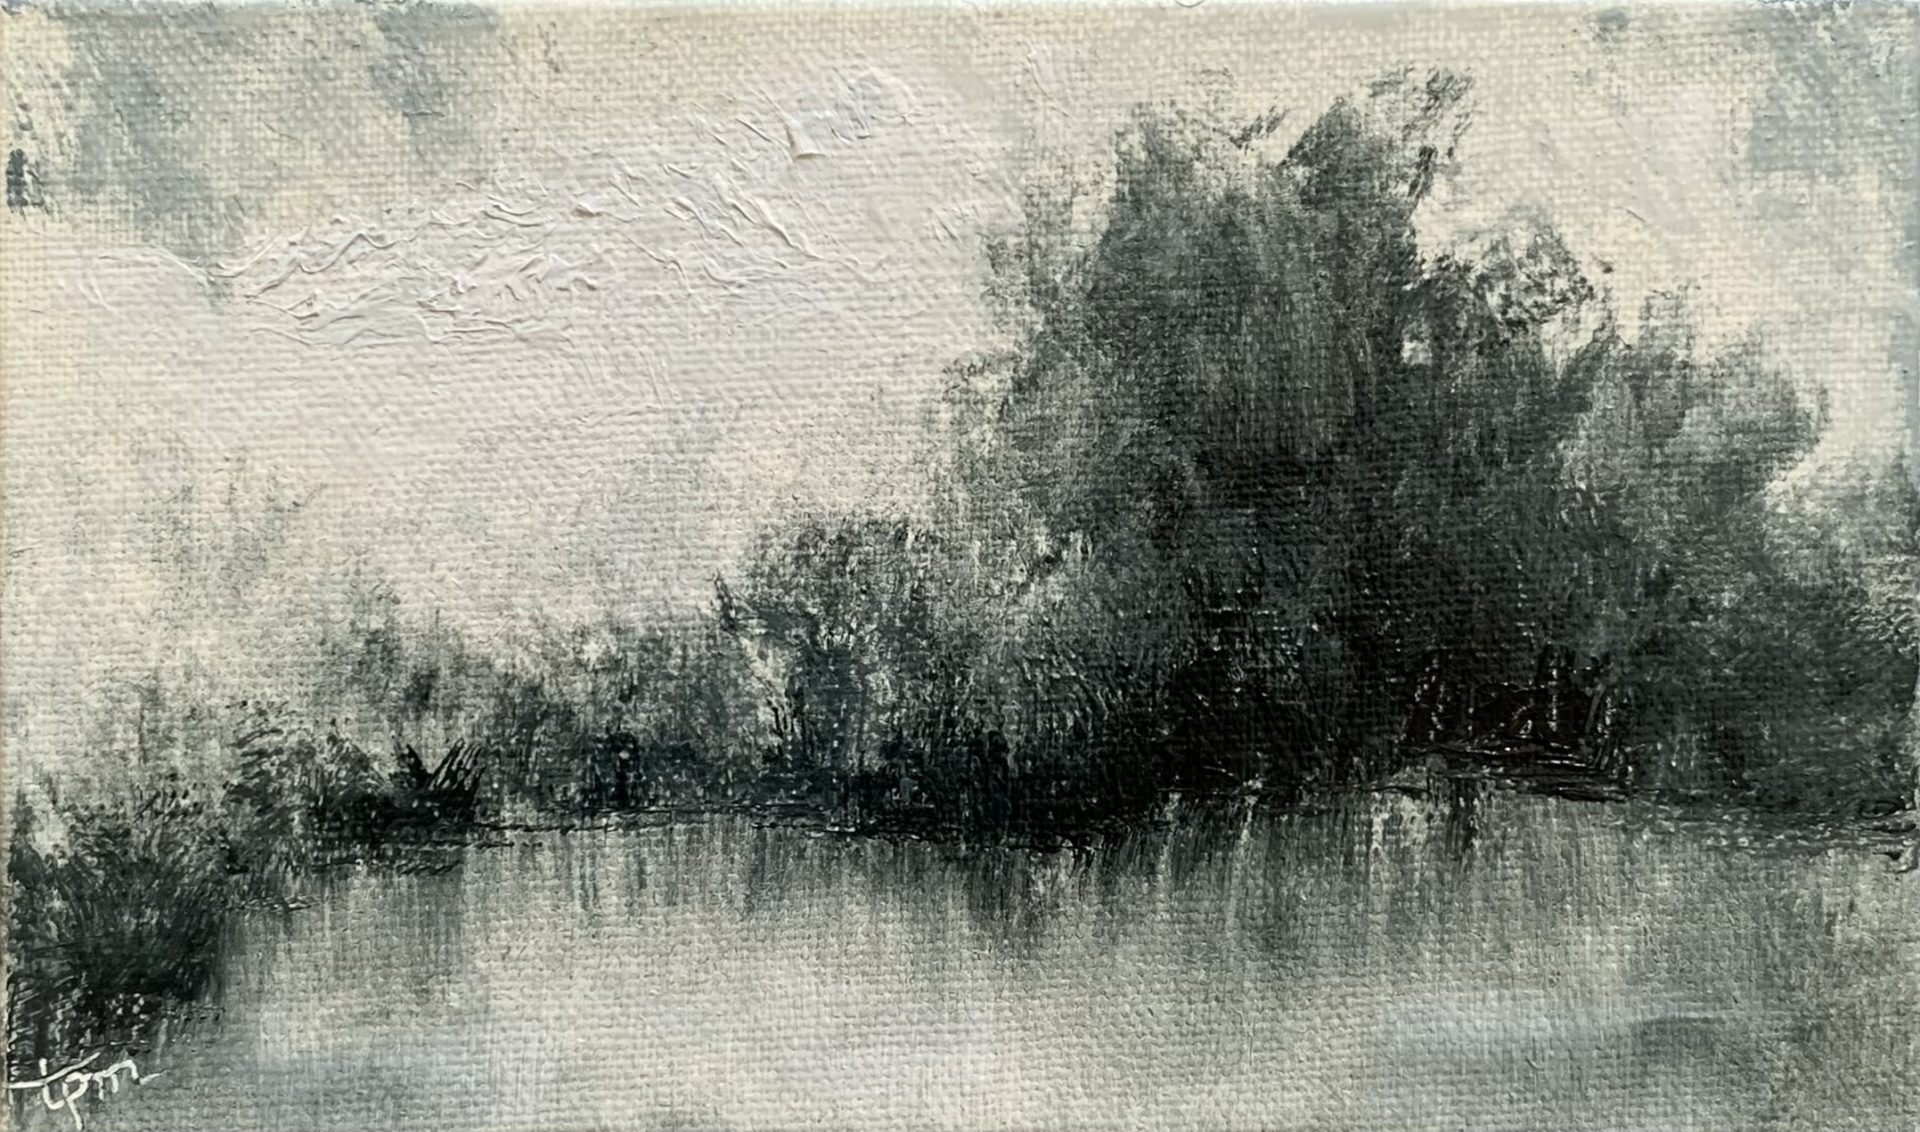 Original tiny oil painting by Tisha Mark, Week 27, 52 Weeks of Finding Light Series, 3"x5" oil on linen panel (2023). Painted in monochromatic cool grays, this tiny landscape scene shows a tree-lined body of water underneath a partially cloudy sky with light reflecting in the water below.